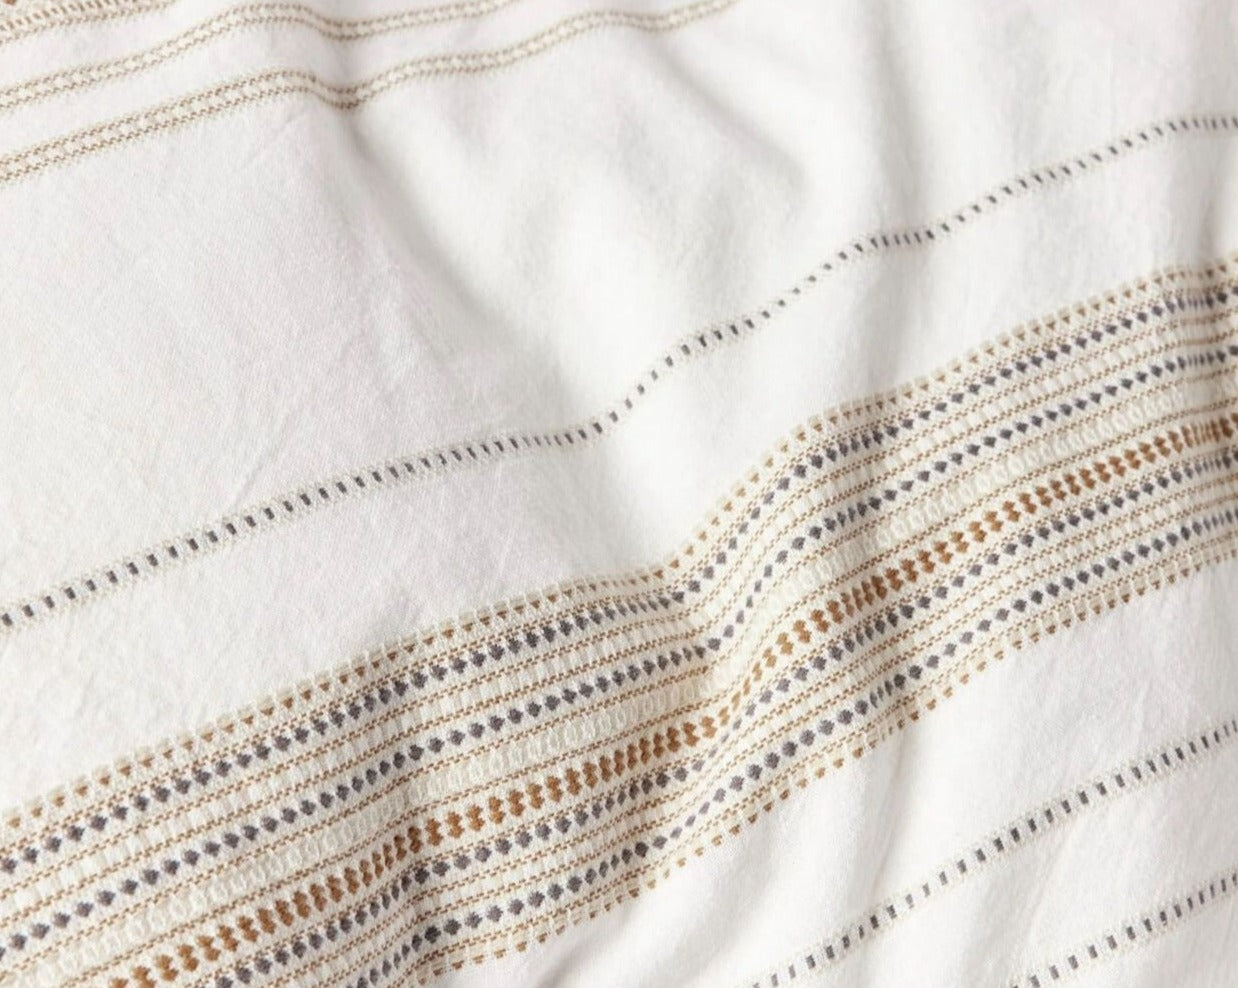 Lobos organic cotton duvet cover with yarn dyed stripes of small geometric patterns. Soft white with hazel. From Coyuchi.